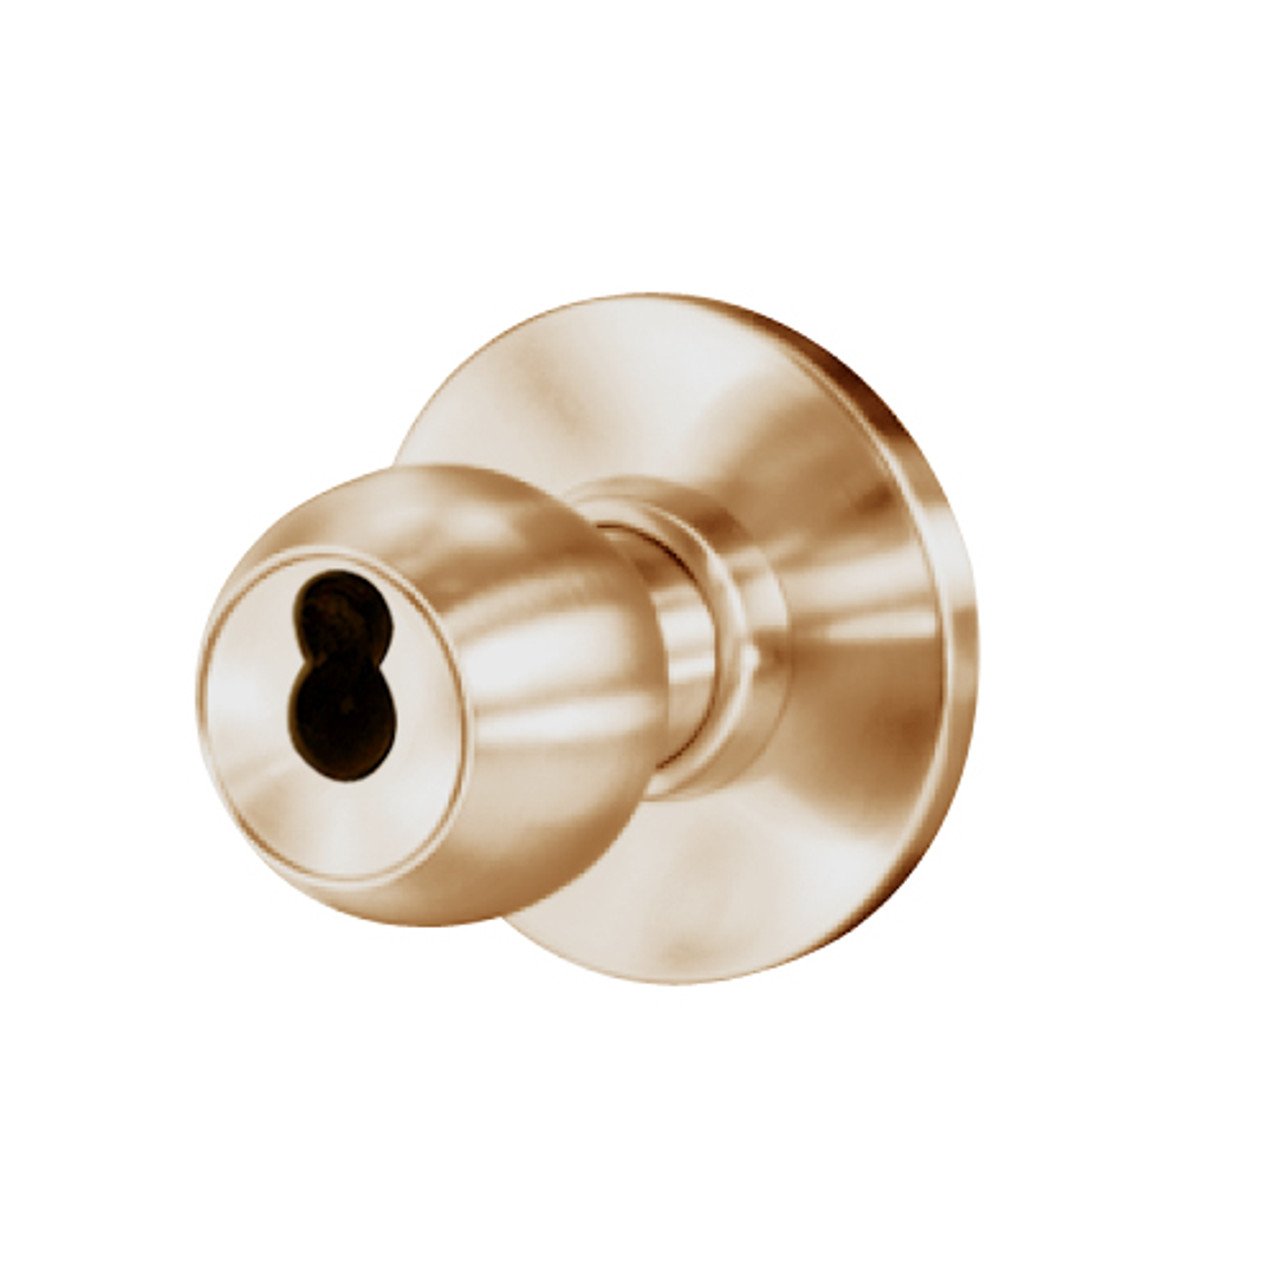 8K57S4AS3612 Best 8K Series Communicating Heavy Duty Cylindrical Knob Locks with Round Style in Satin Bronze